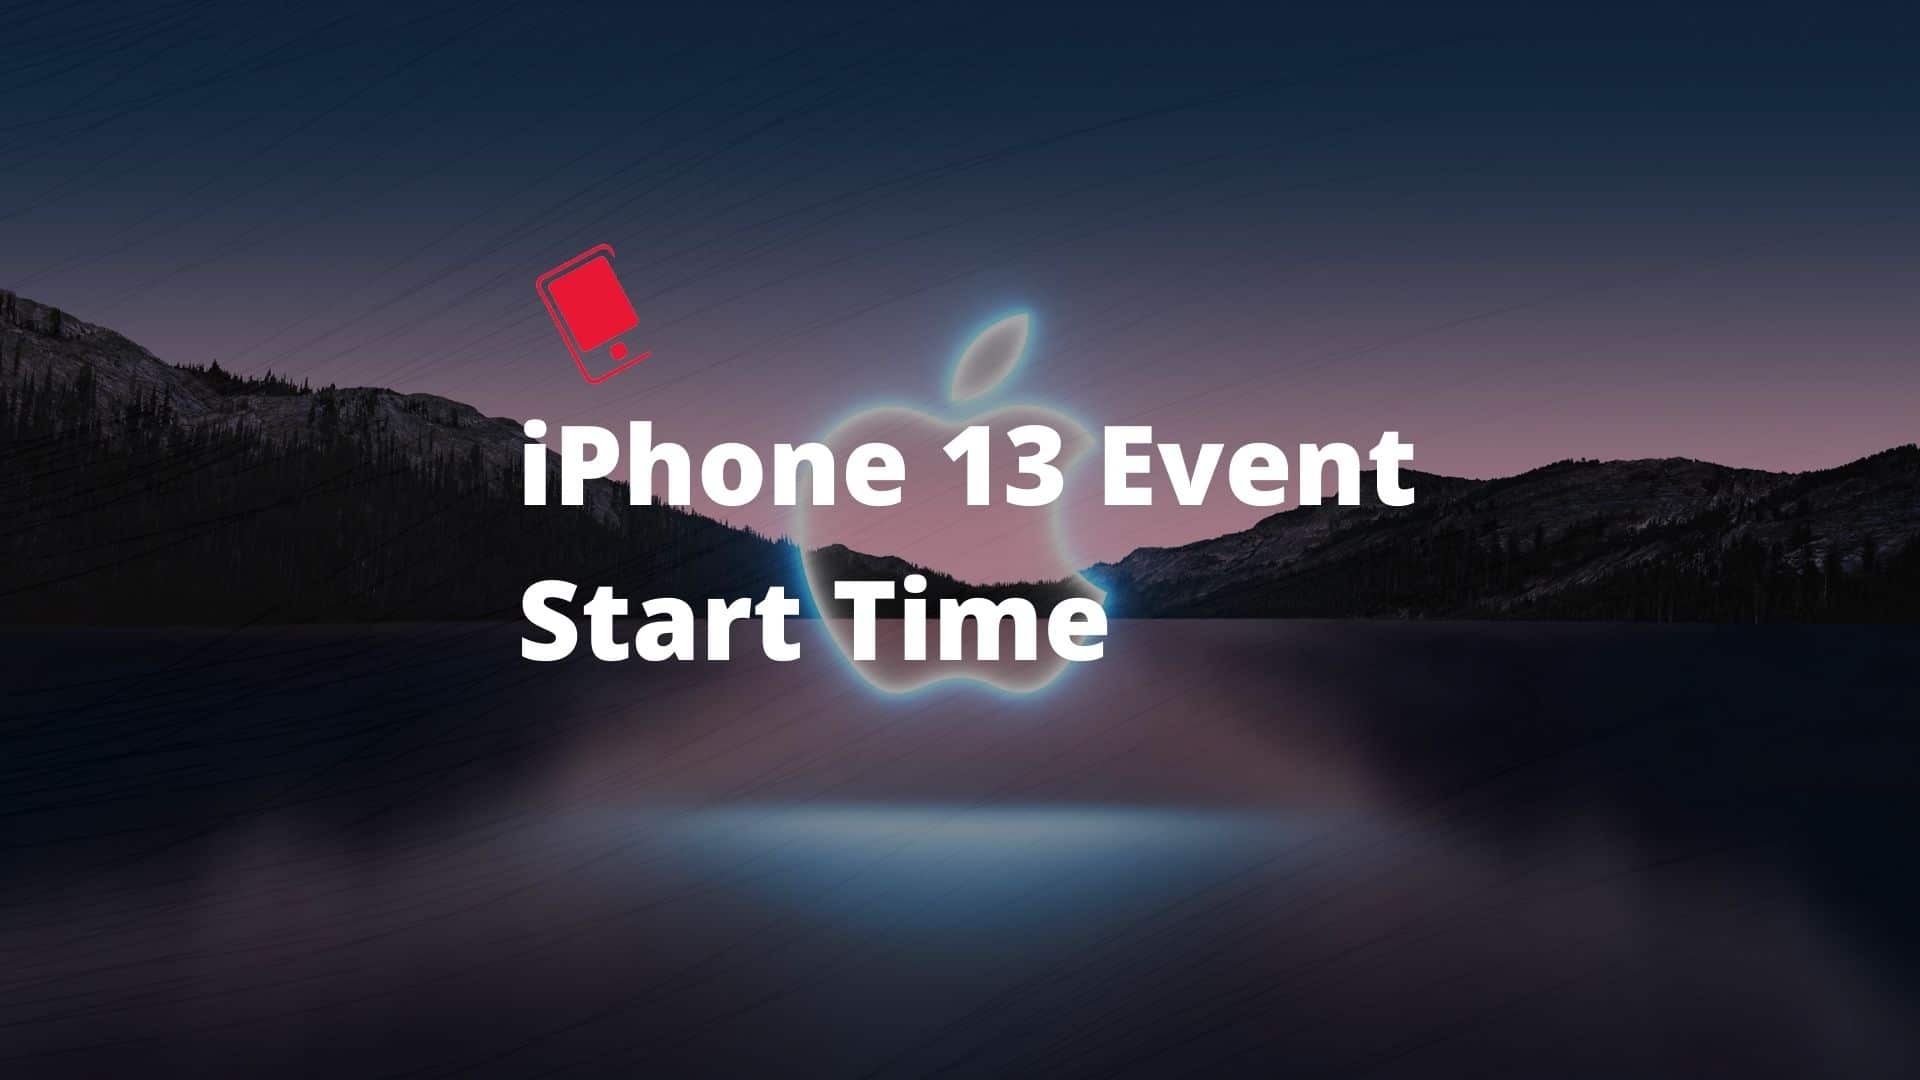 iPhone 13 event start time